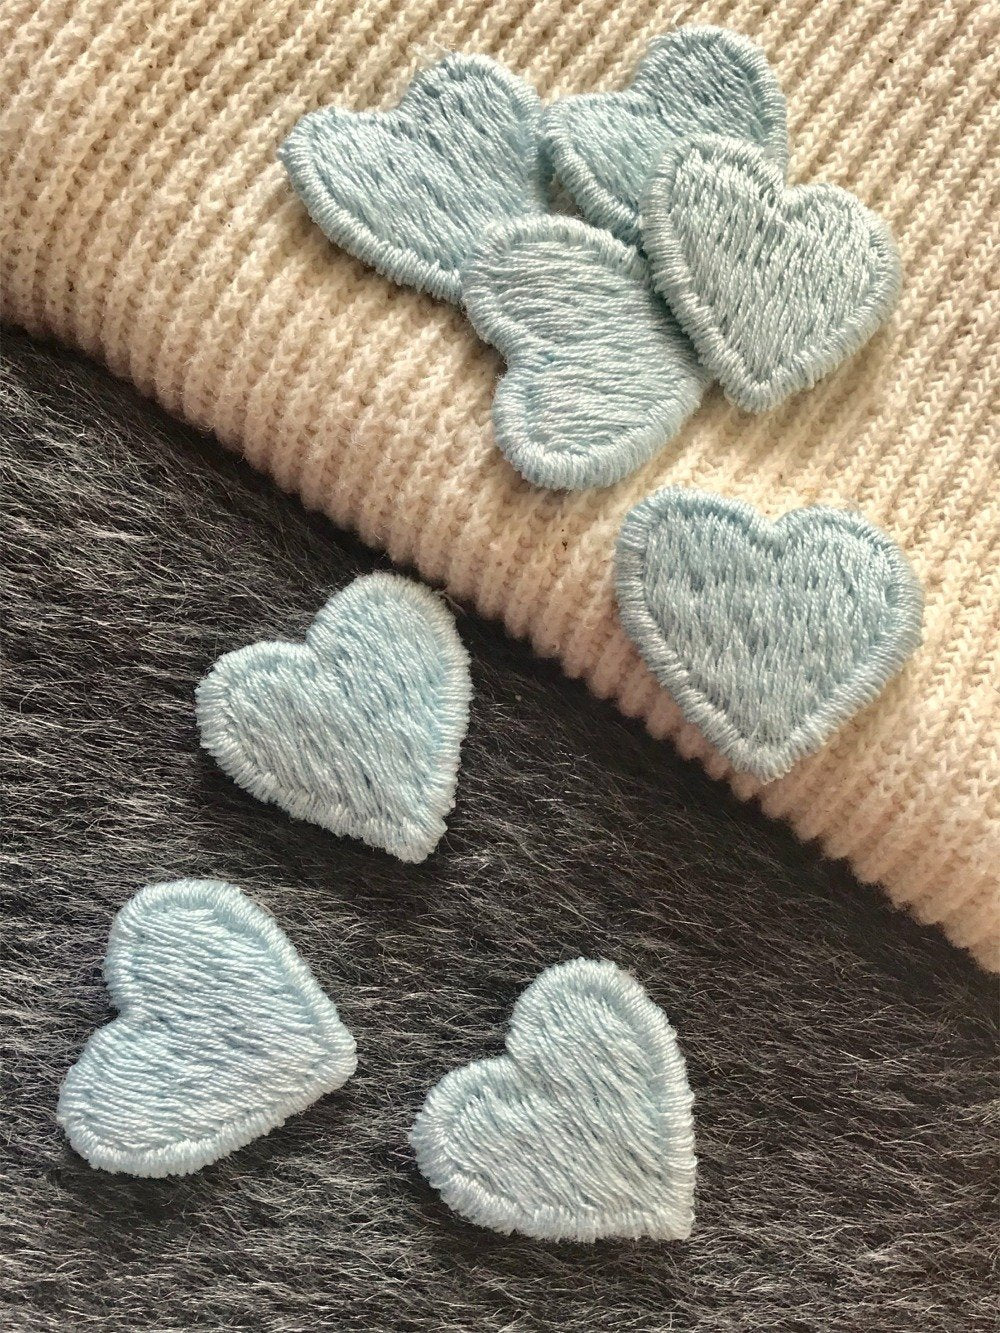 Light Blue Heart Vintage Embroidery Applique Sewing Patches #5099